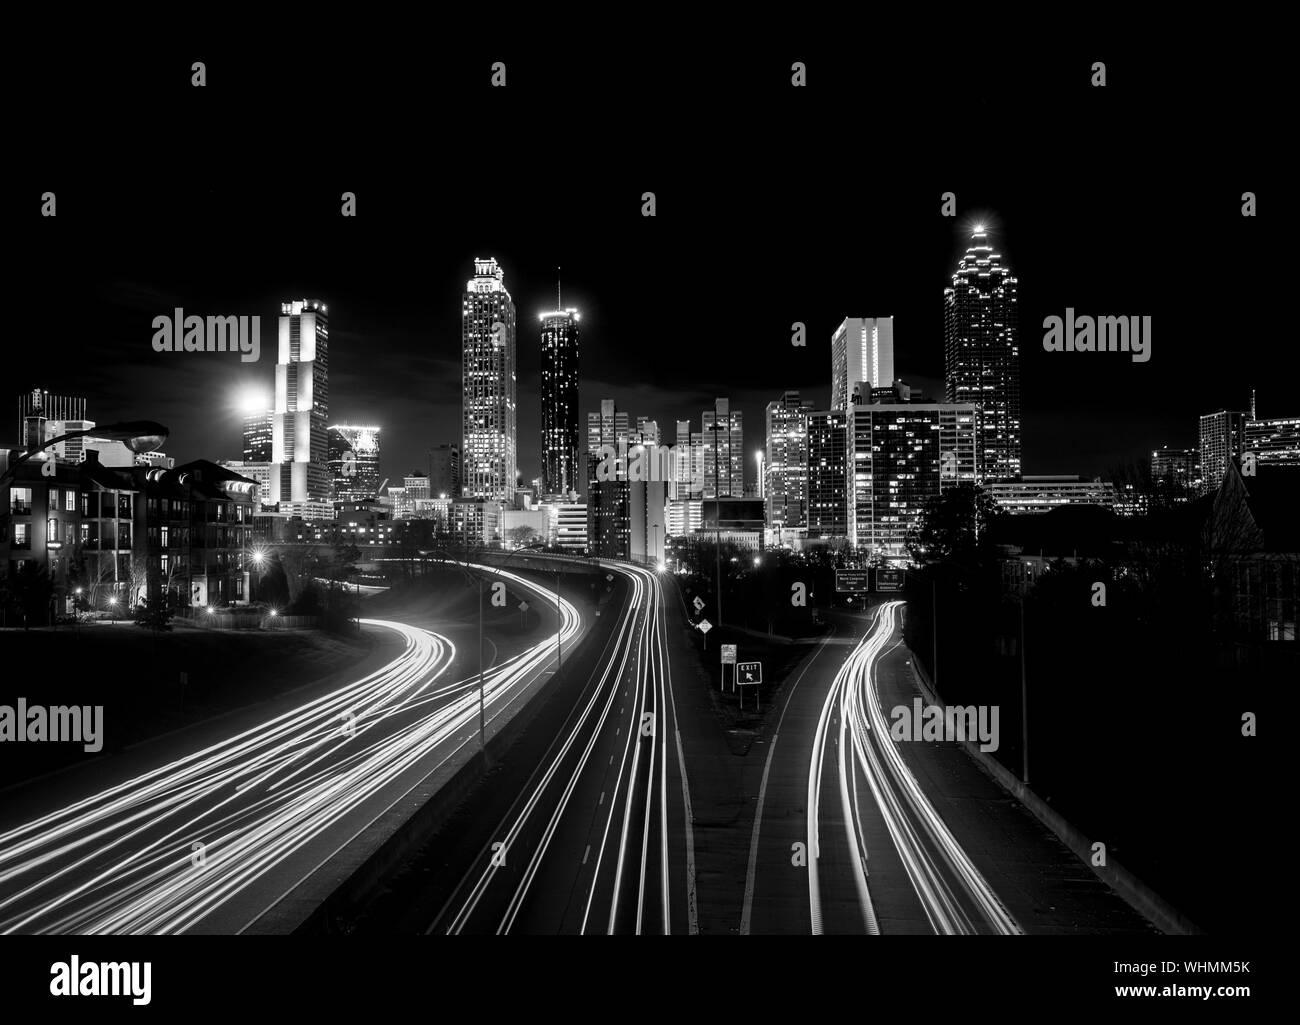 Atlanta Skyline at night, high contrast black and white with light trails Stock Photo